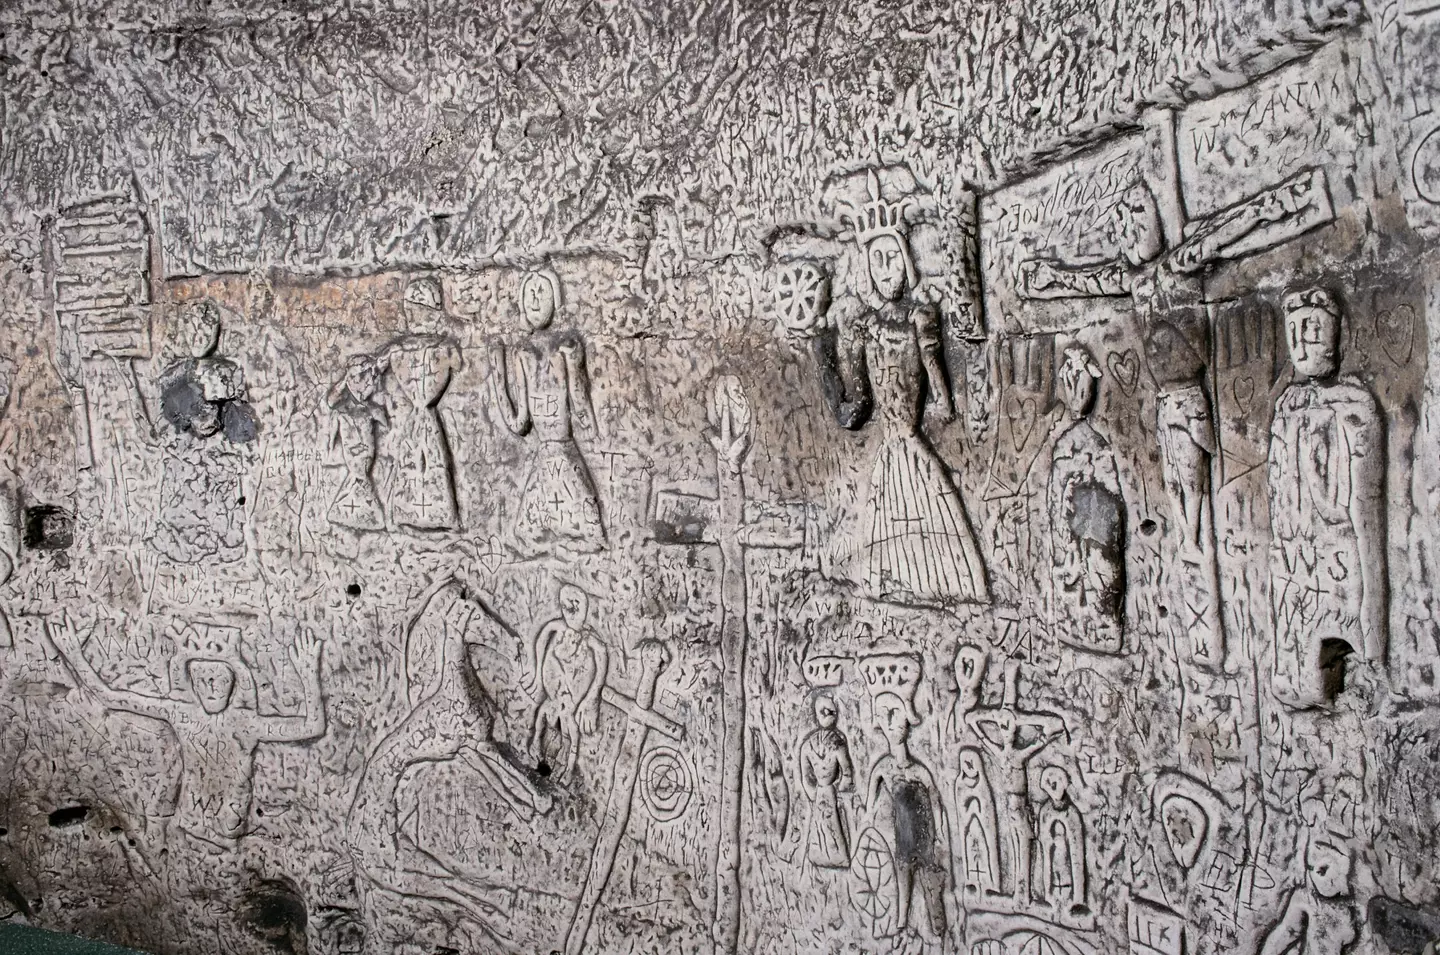 The intricate carvings on the walls of the Royston Cave.